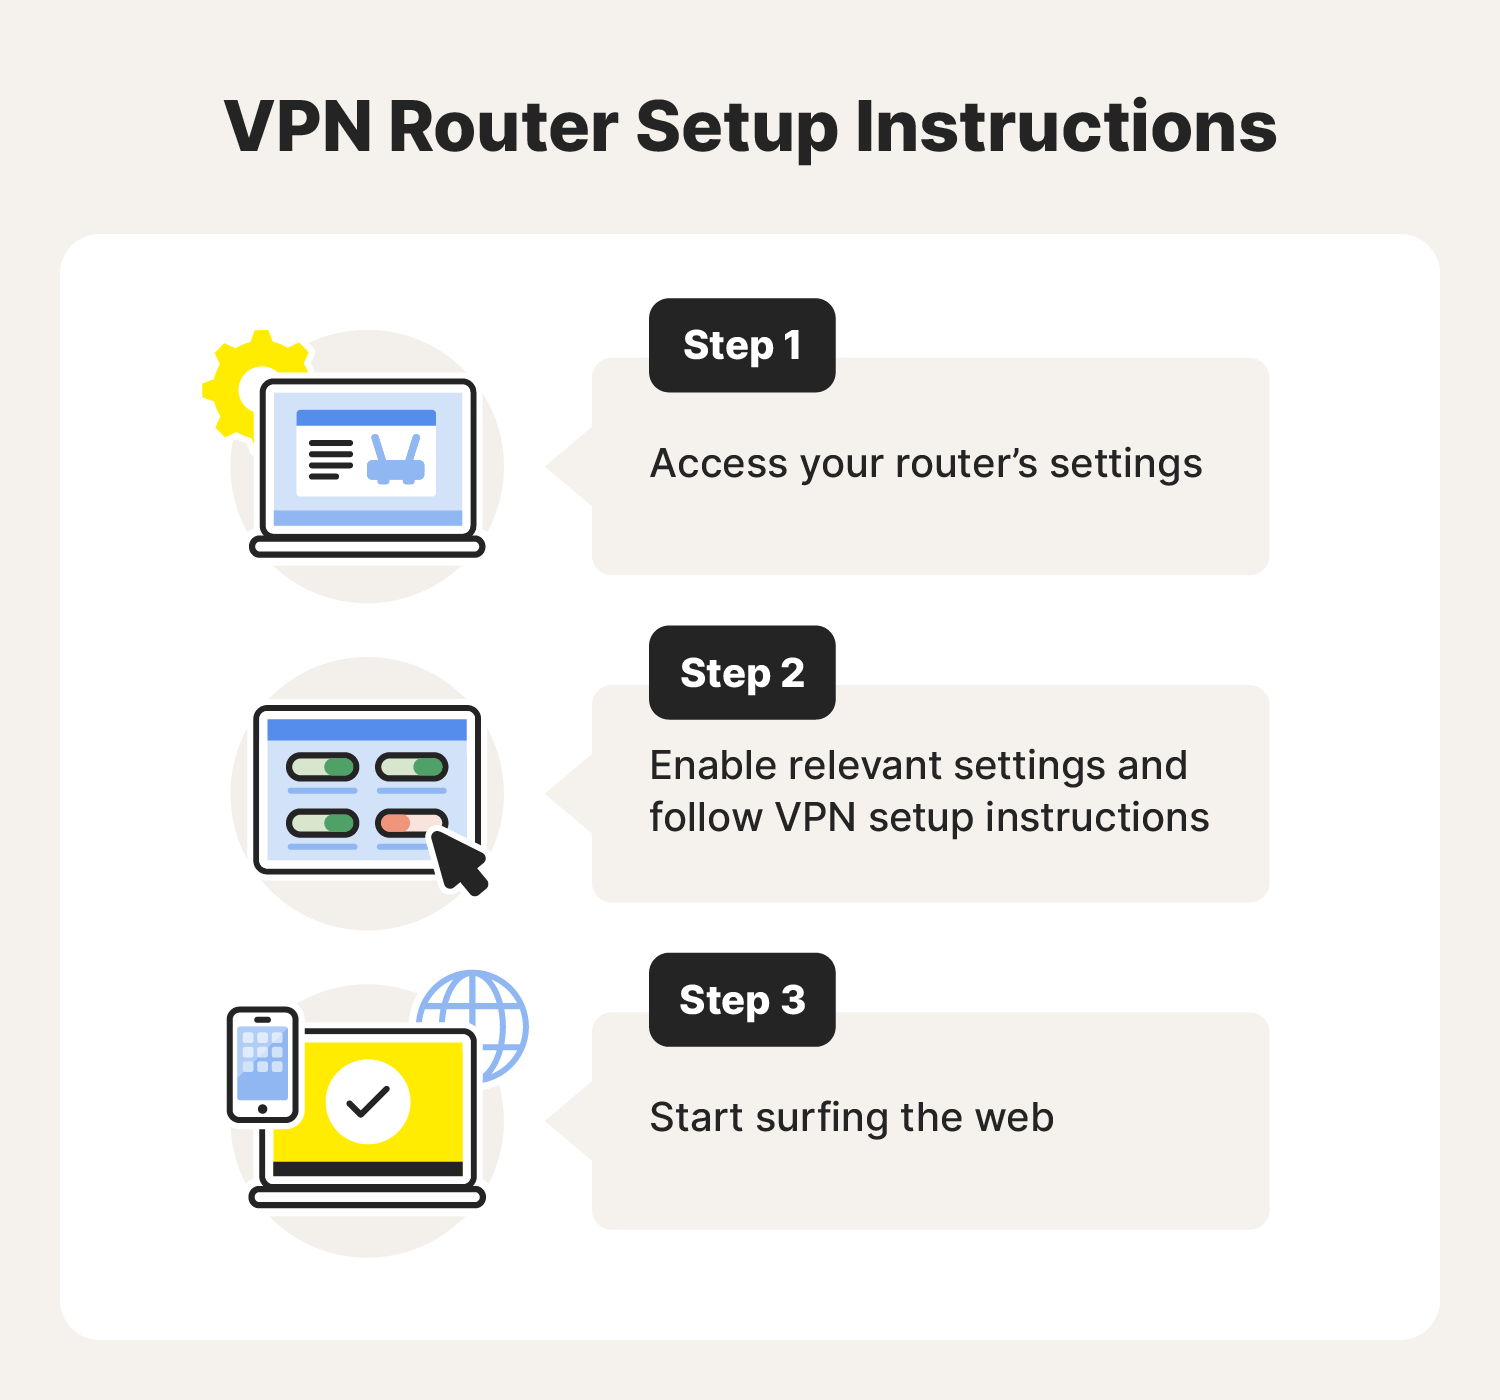 A graphic showcases how to install a VPN on a router in three simple steps.